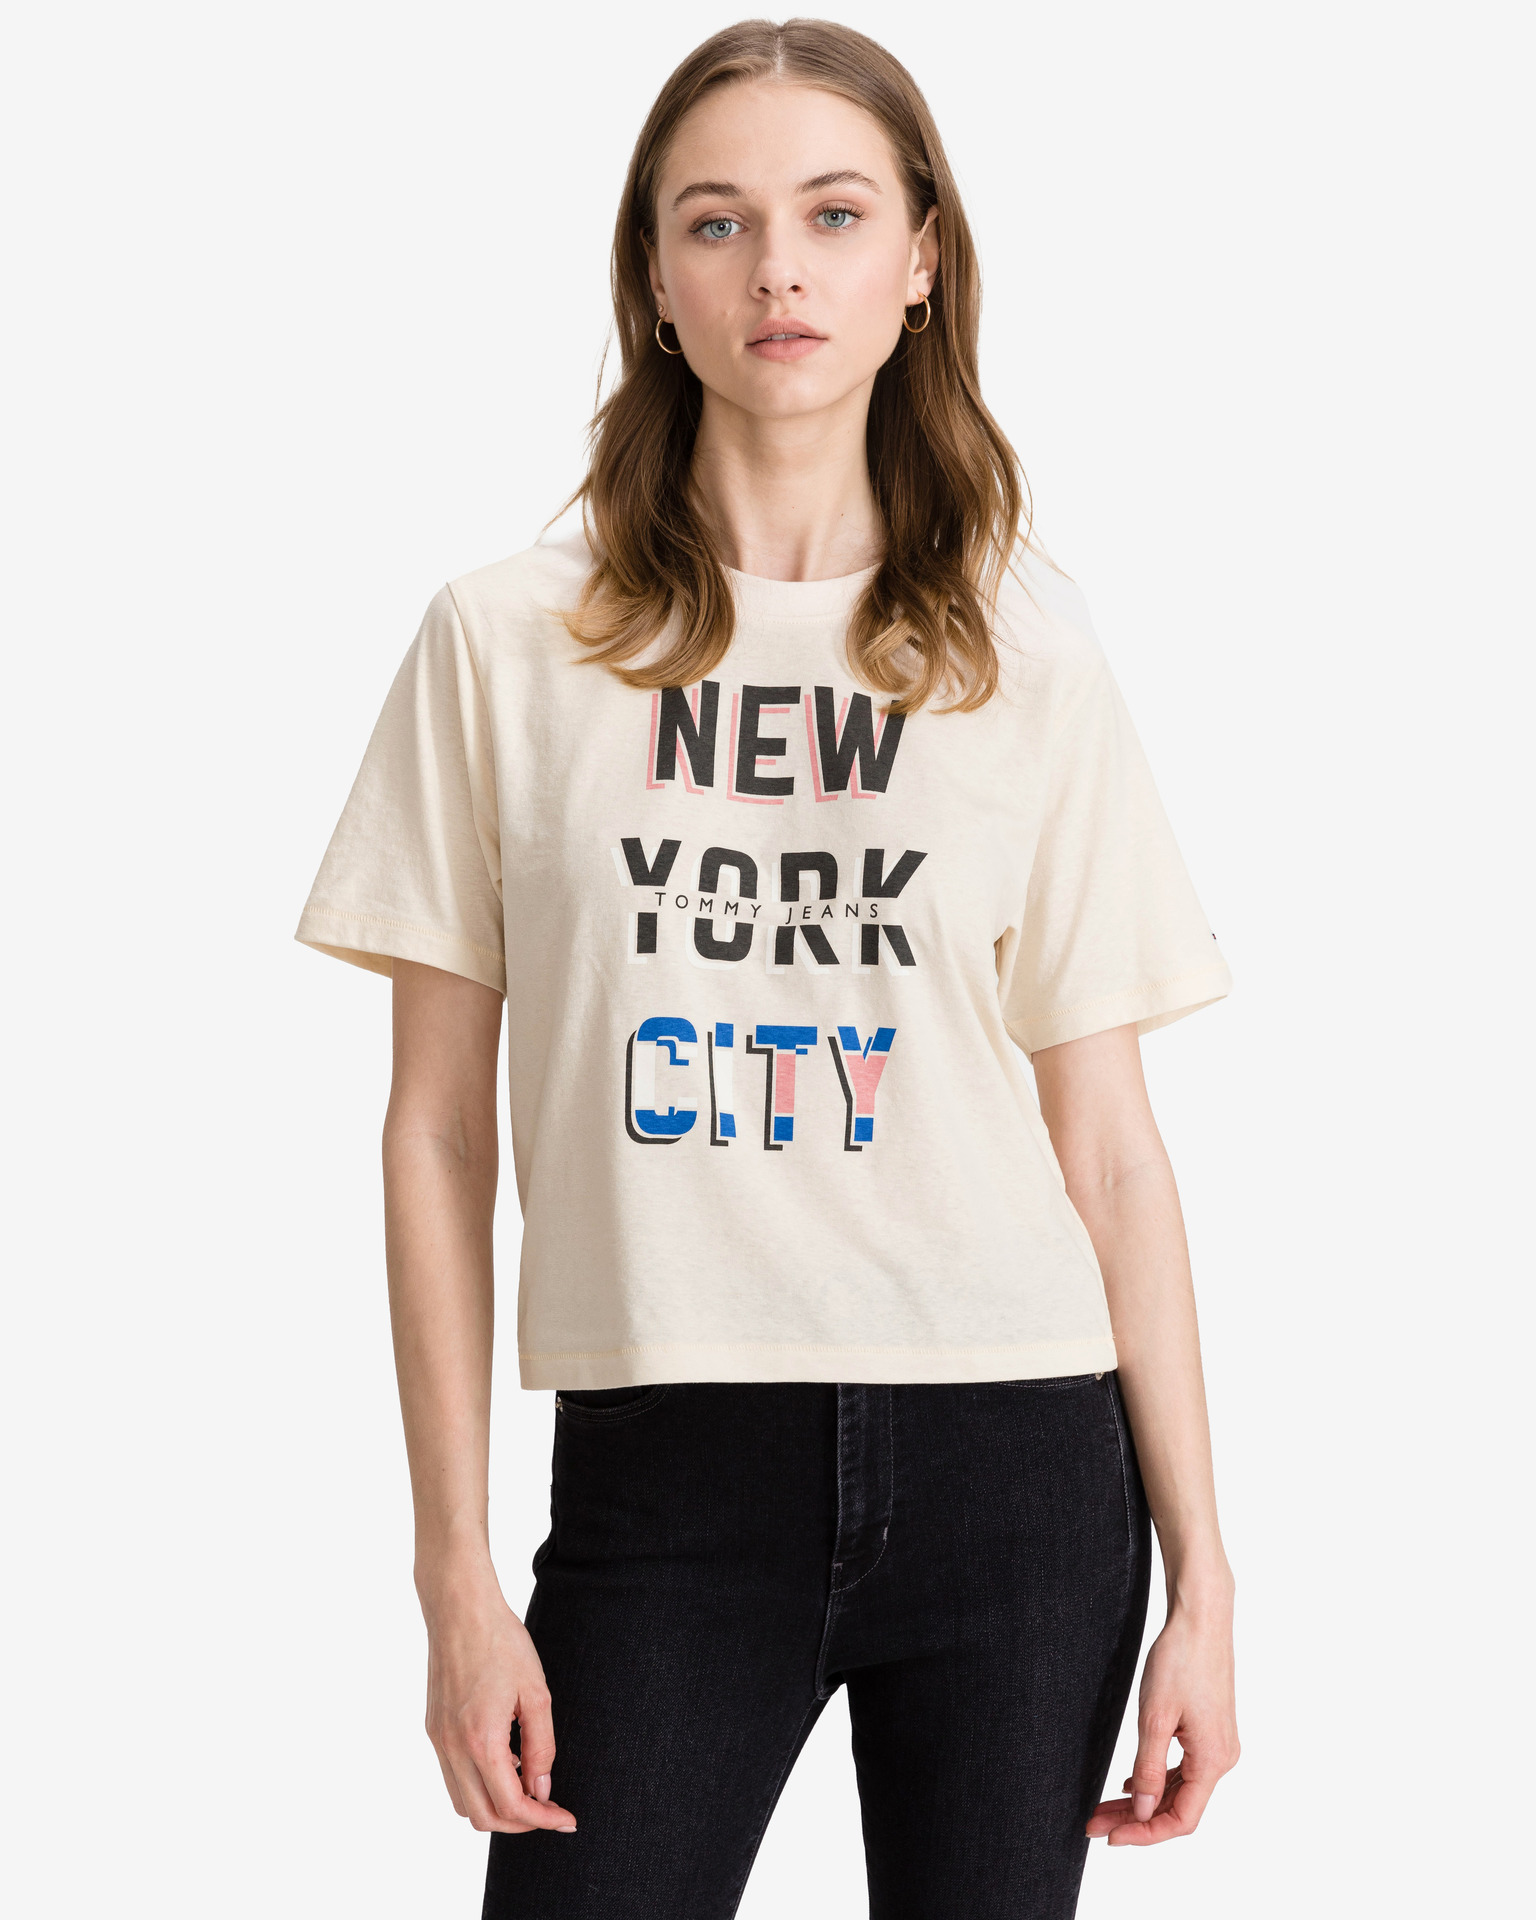 New York City Crop top Tommy Jeans